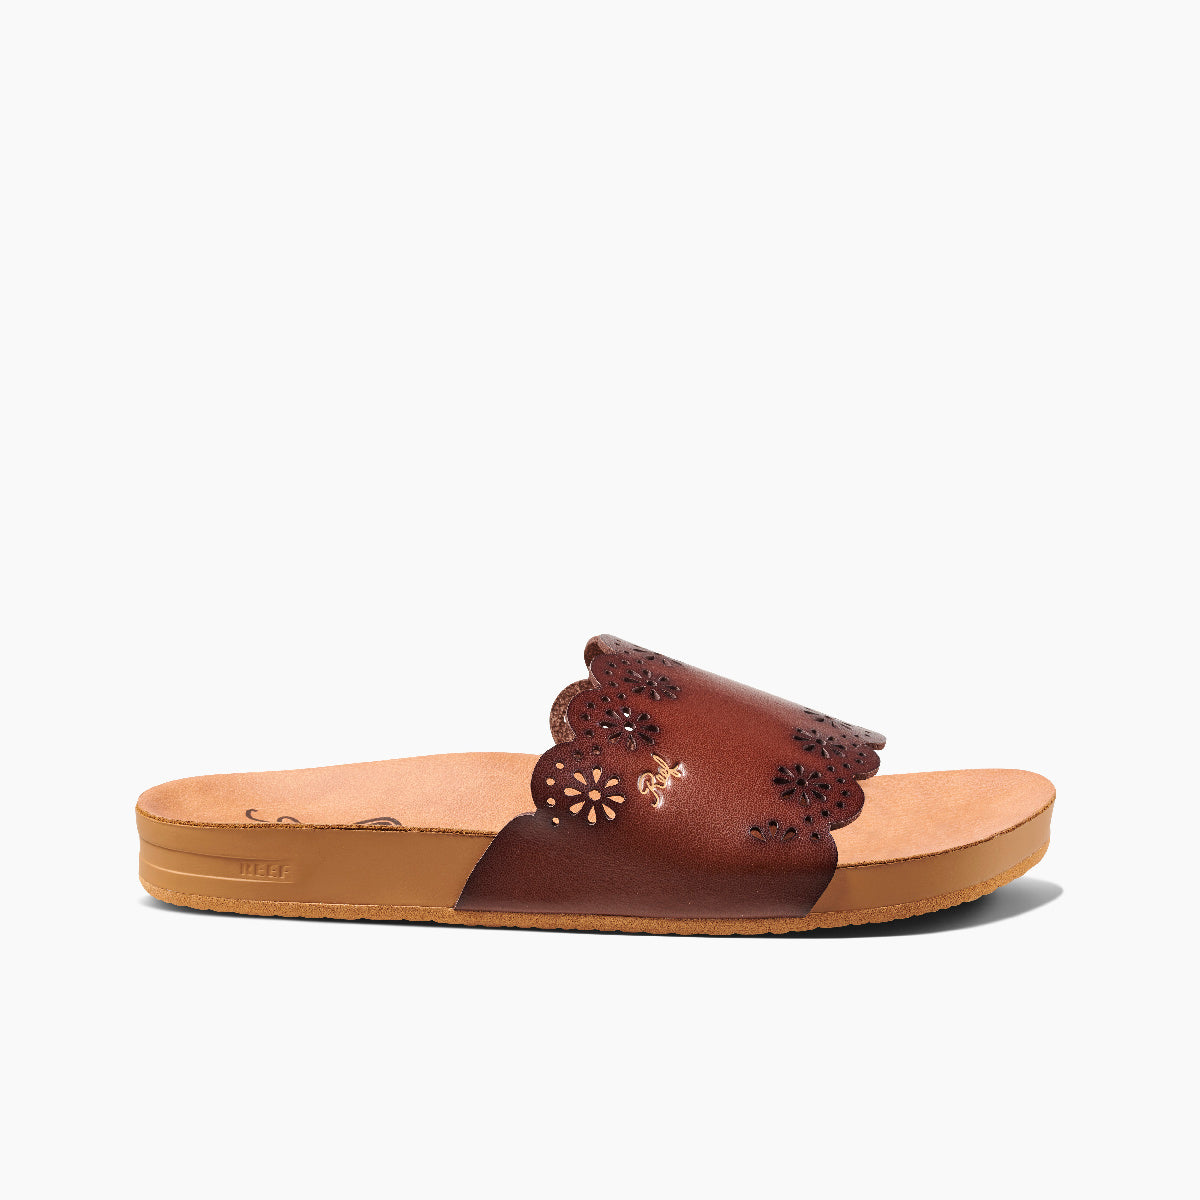 Reef Cushion Scallop Scout Womens Sandal Rust 7